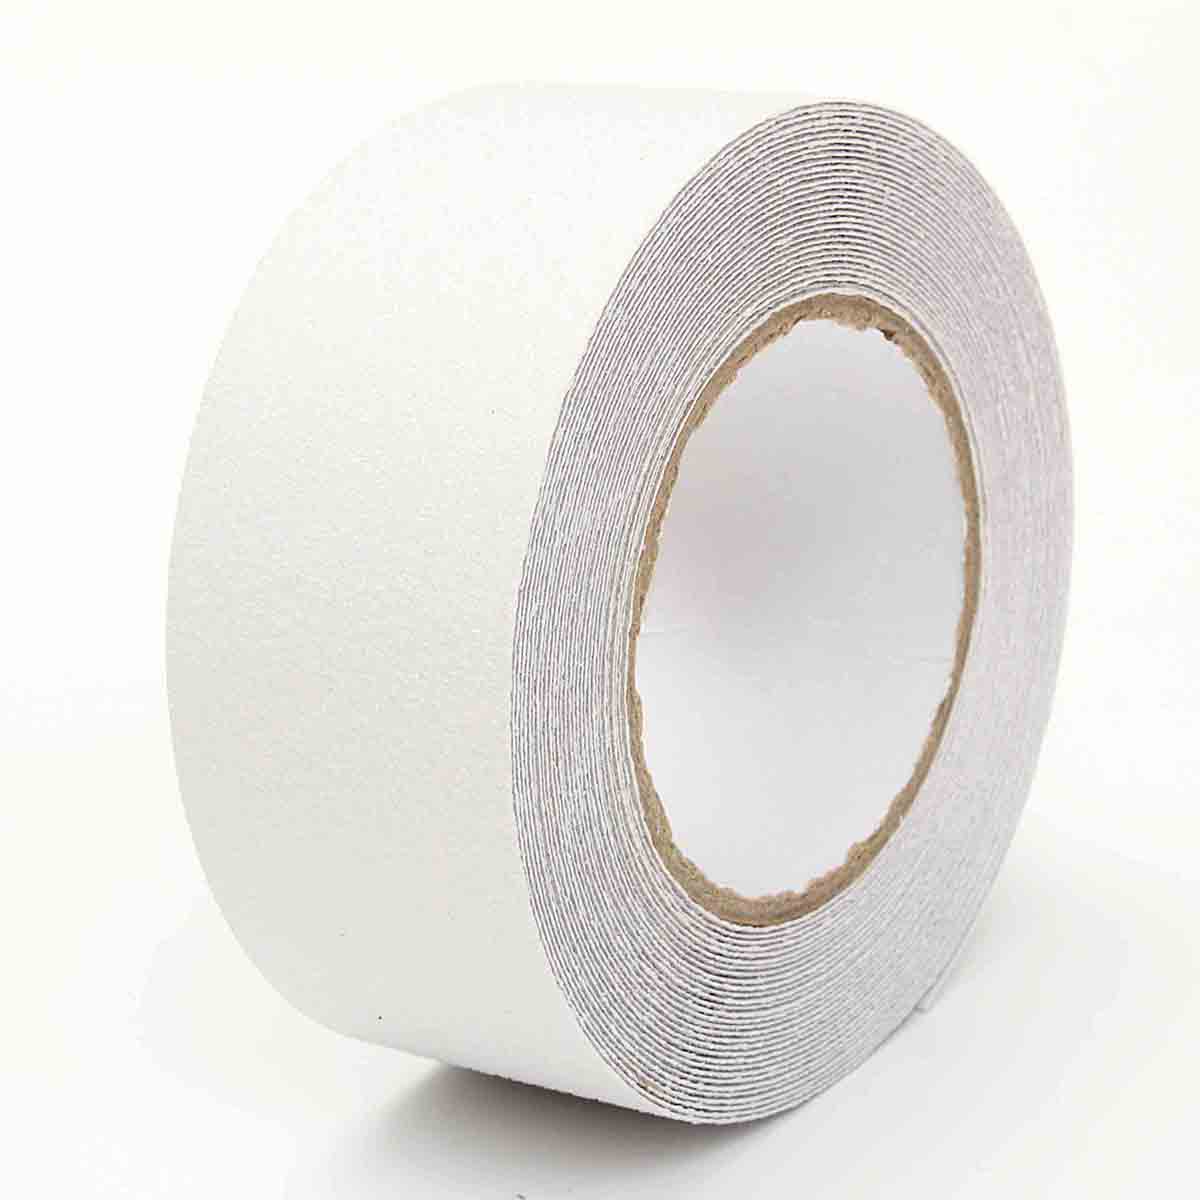 PVC Tape Size: 50mmx33m Roll - White - Pack of 10